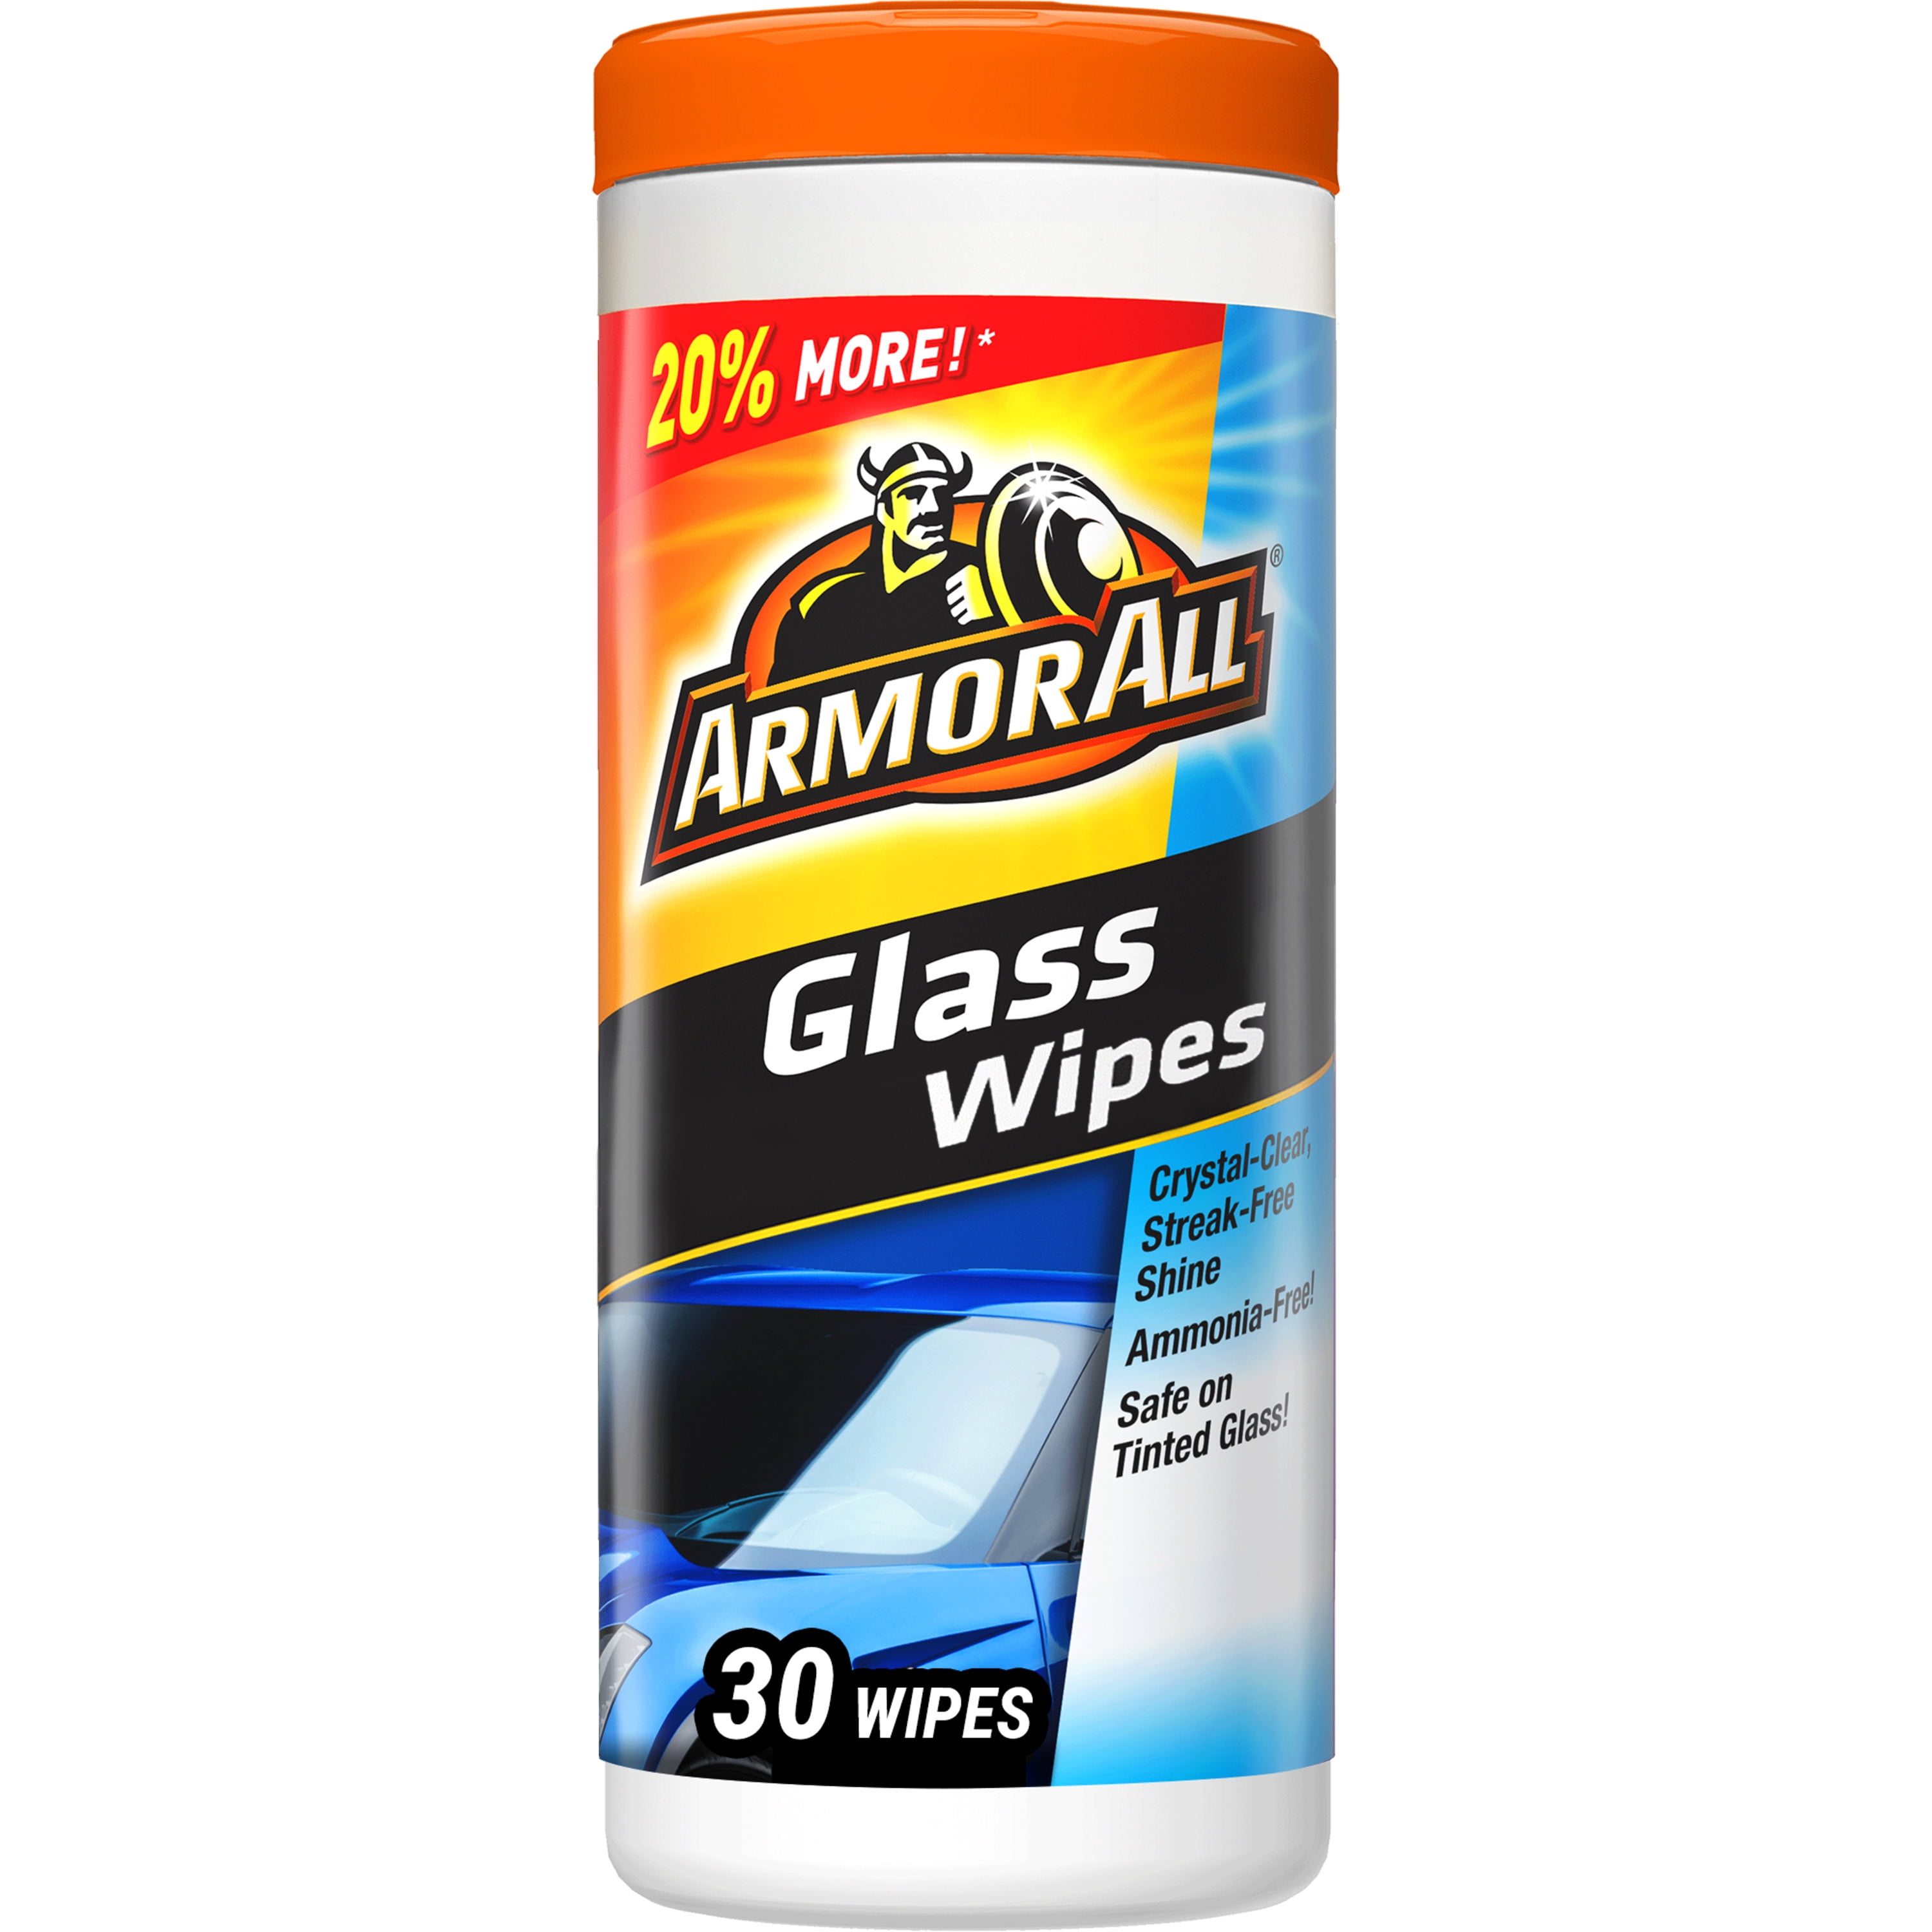 Armor All Cleaning Wipes (50 count) PK-2